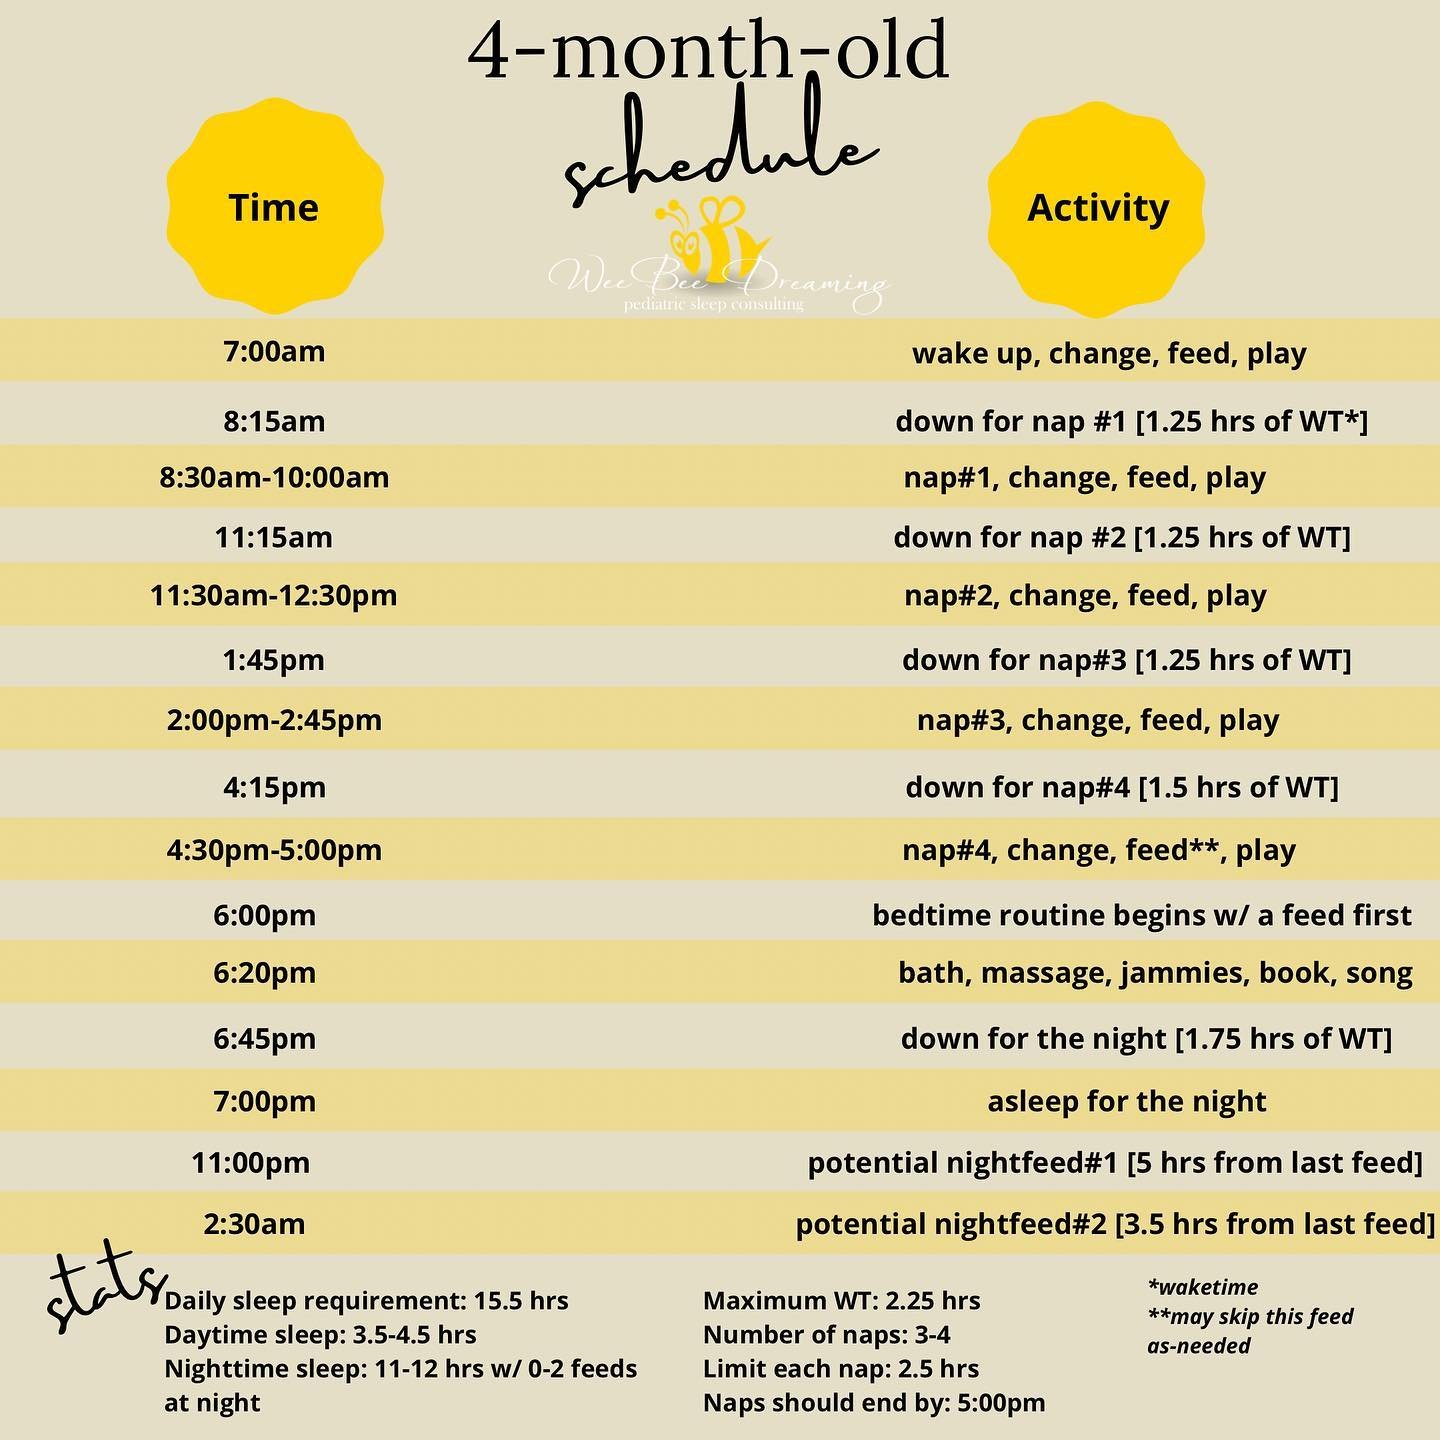 4 Month Old Breastfeeding Schedule - The Best Ideas for Kids